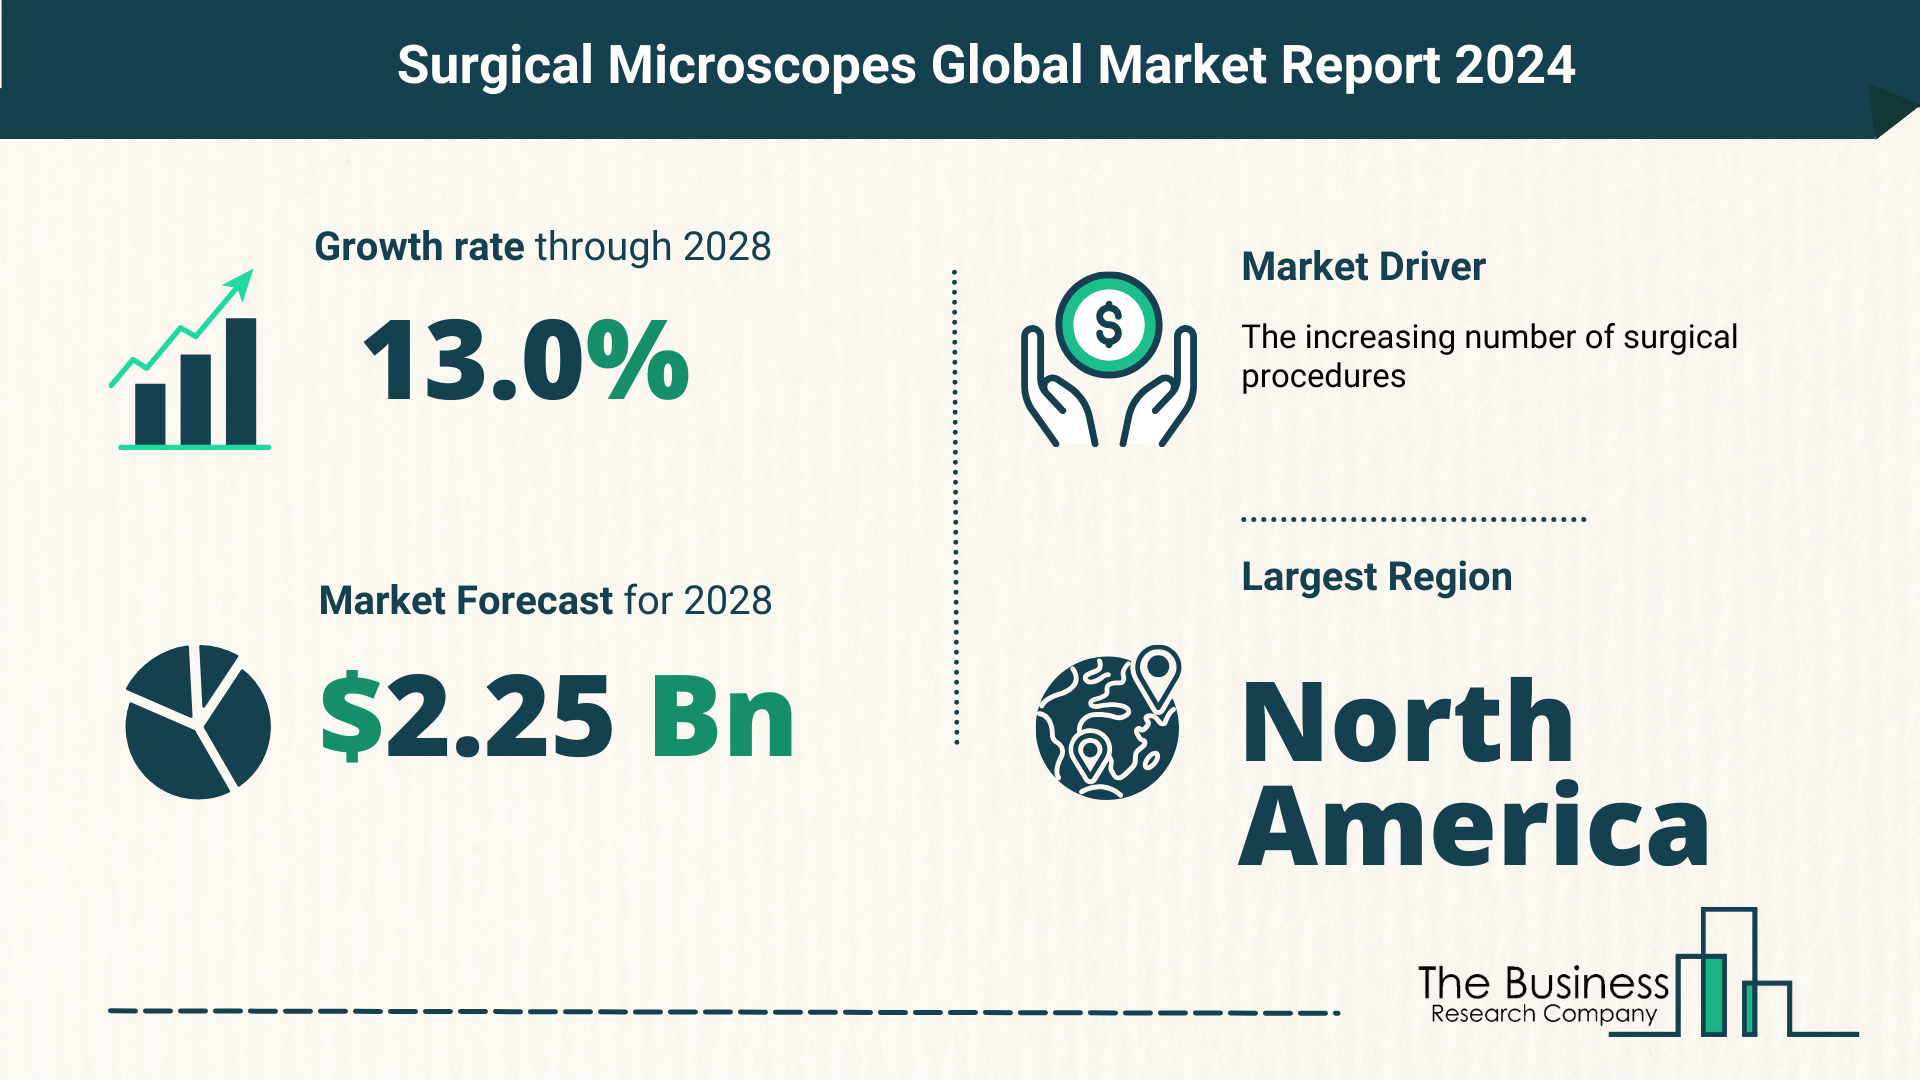 Global Surgical Microscopes Market